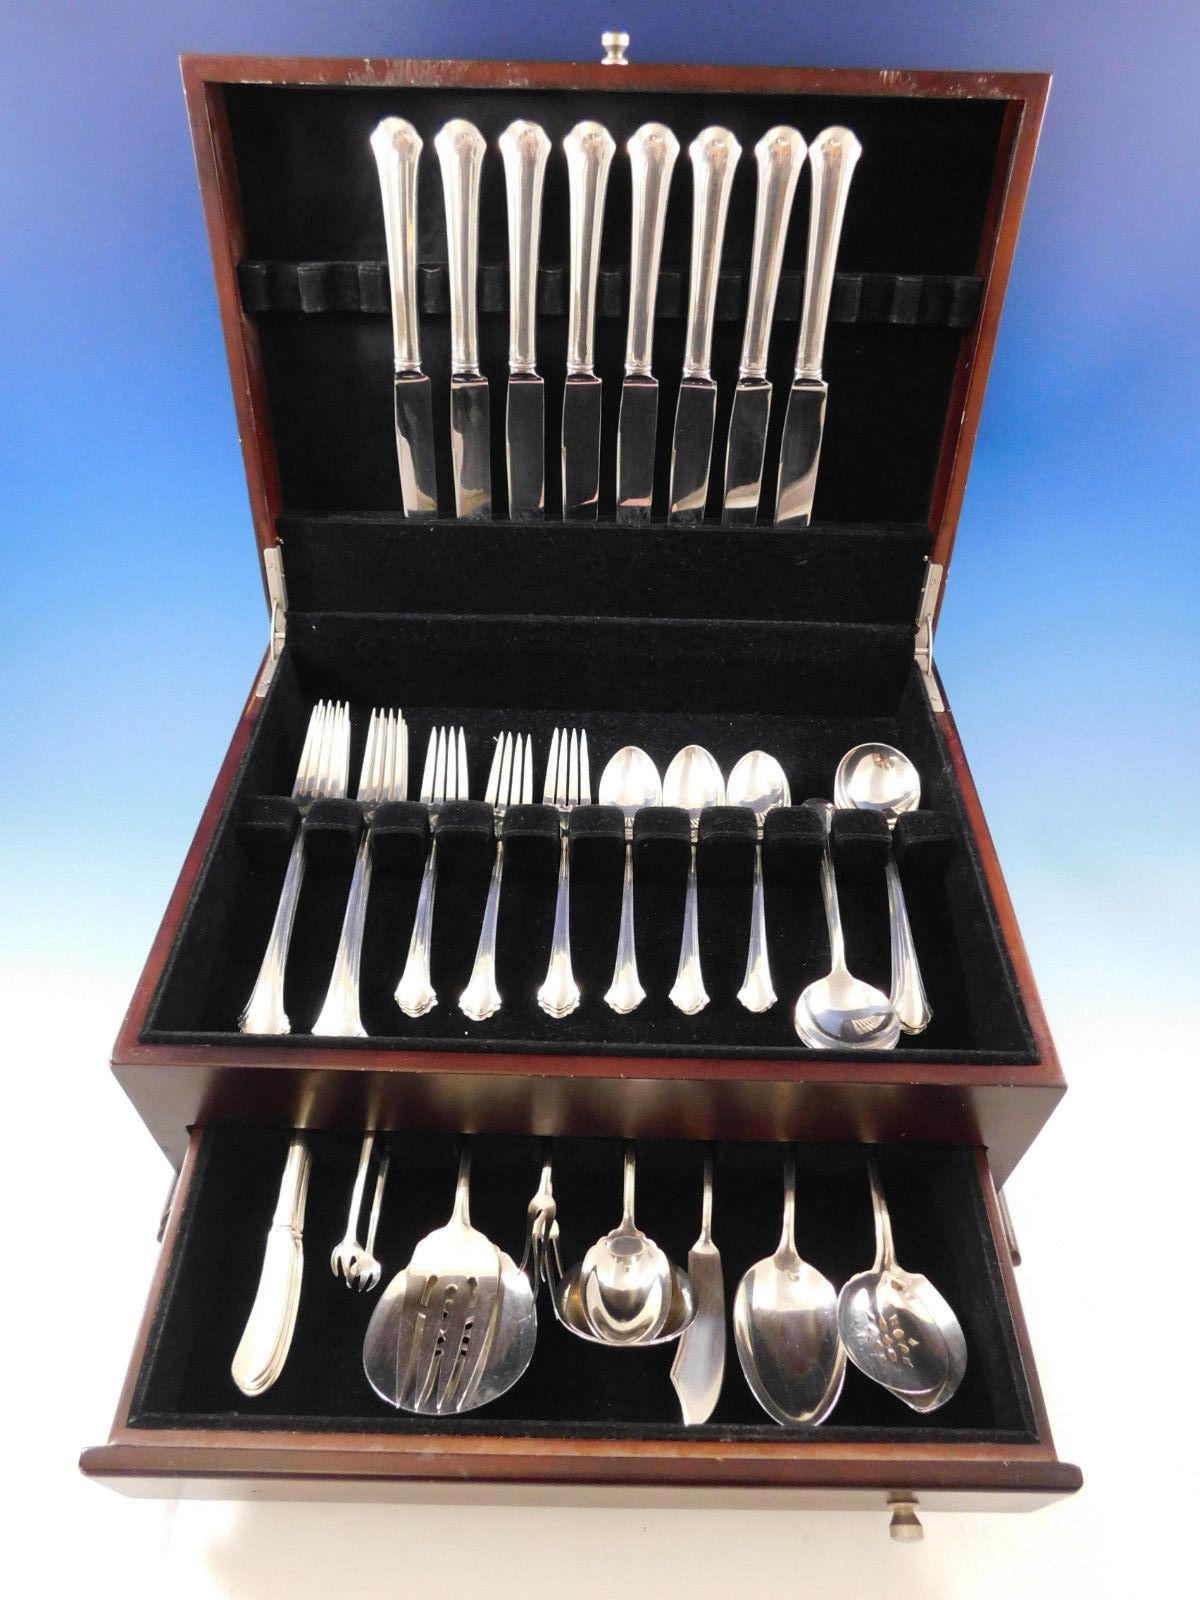 Dinner size Chippendale by Towle sterling silver flatware set of 59 pieces (with lots of great servers!). This set includes:

Eight dinner size knives, 9 5/8